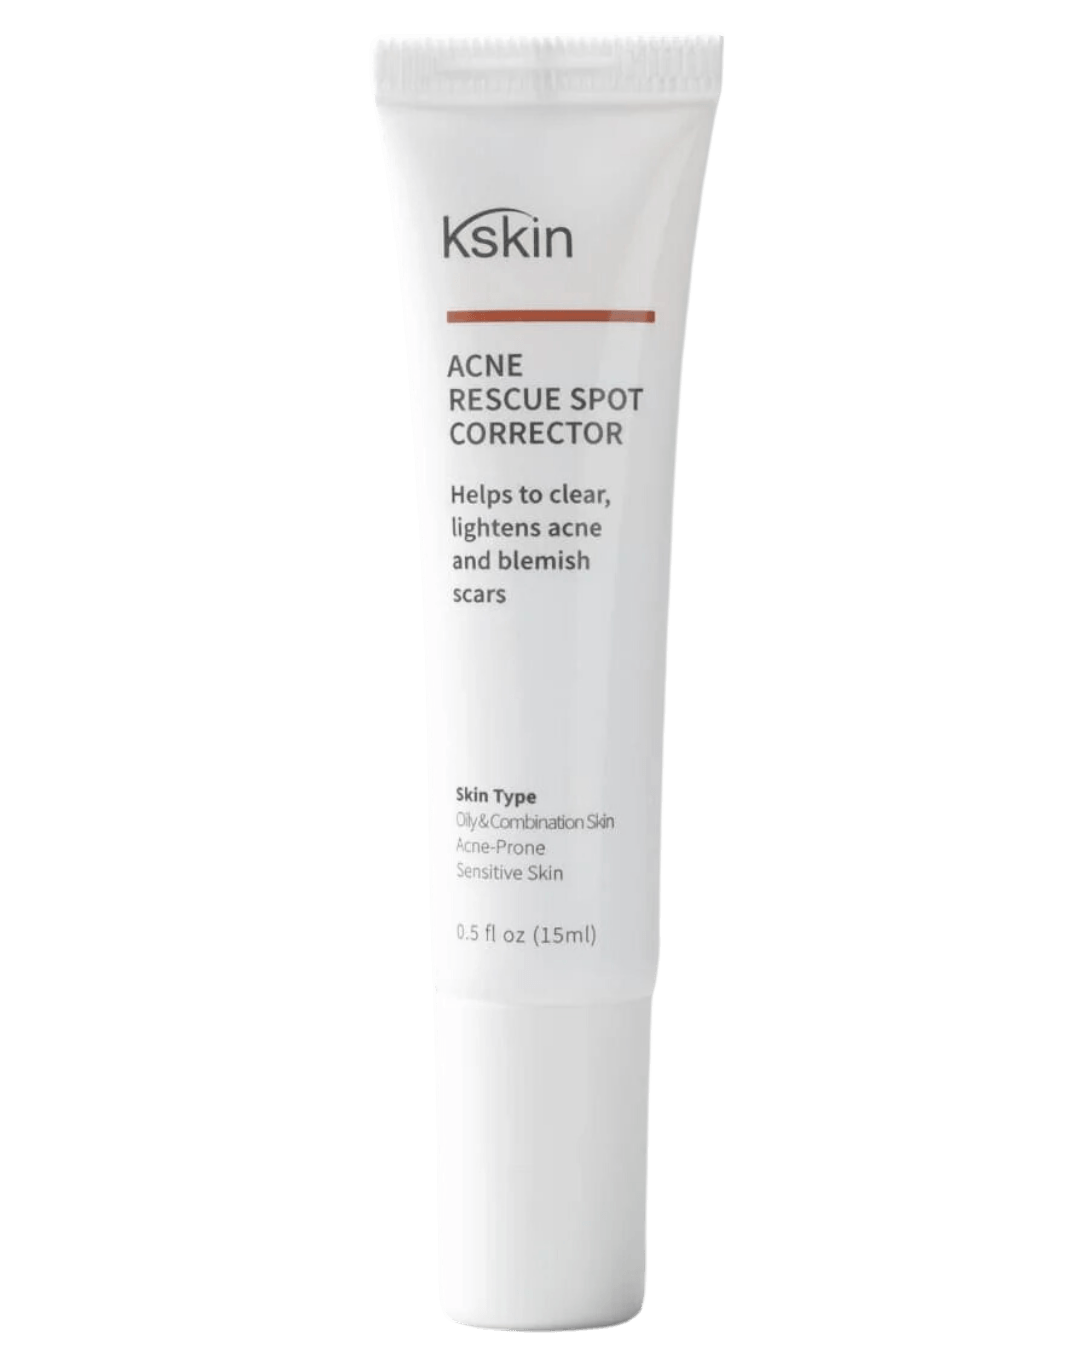 Daily Vanity Beauty Awards 2024 Best Skincare Kskin &#8211; Rescue Spot Corrector Voted By Beauty Experts